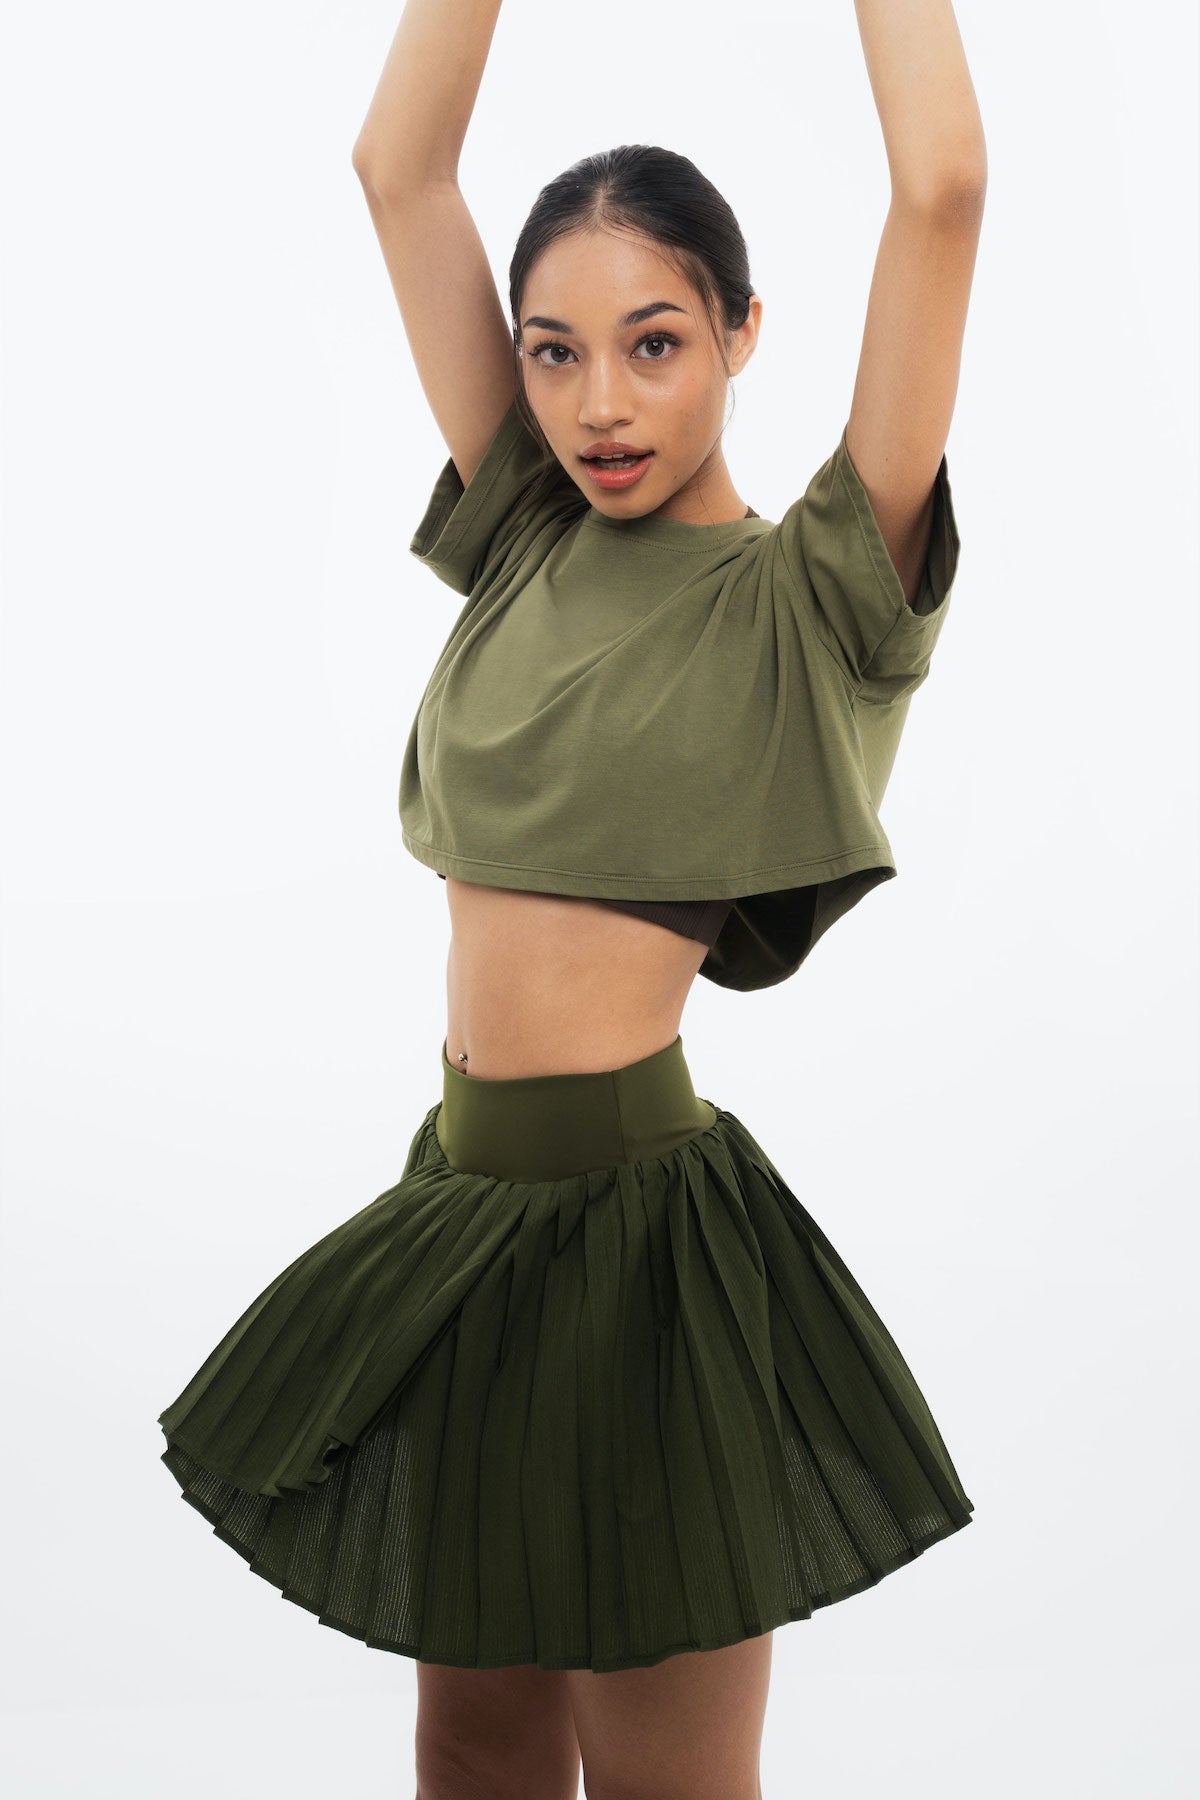 Movable Crop Shirt in Green (1 LEFT)